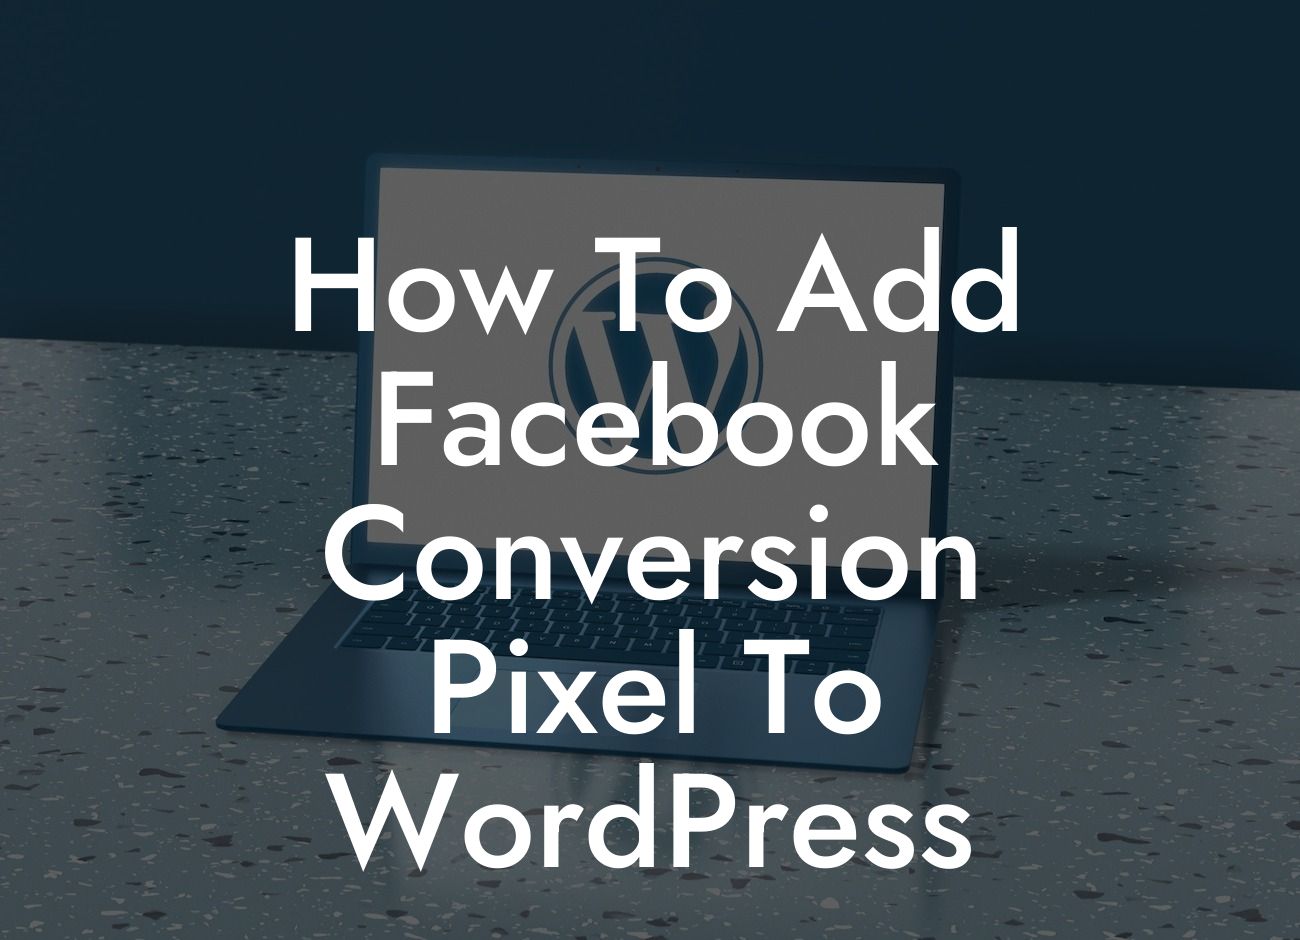 How To Add Facebook Conversion Pixel To WordPress